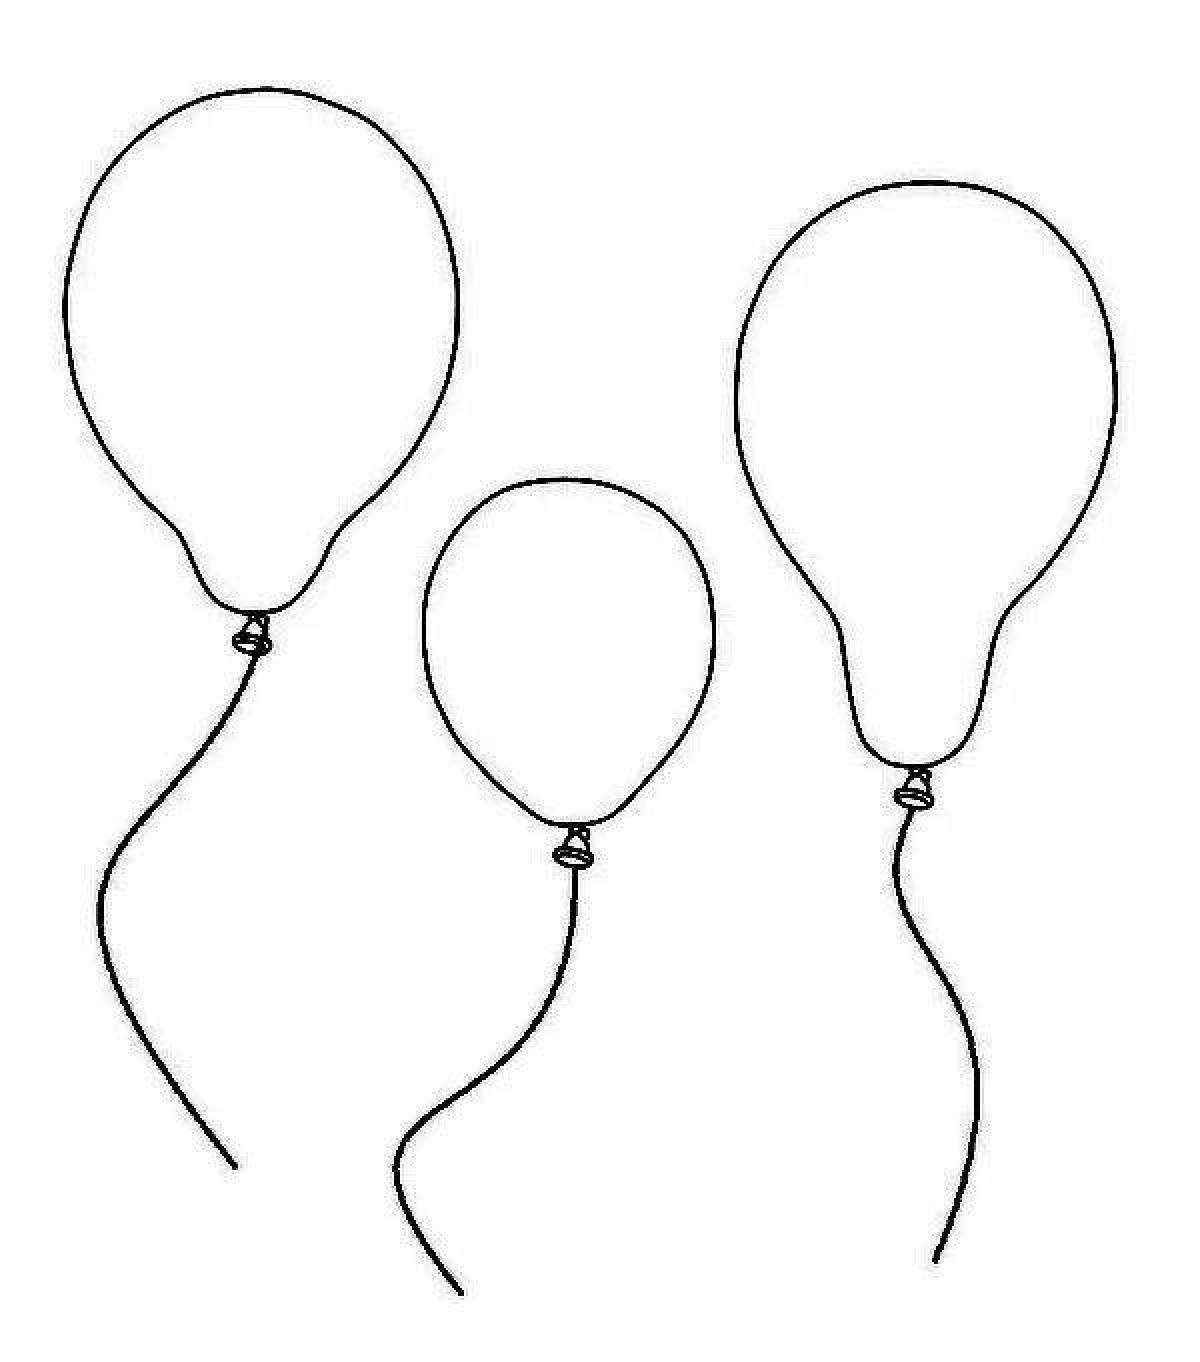 Colored balloon coloring page